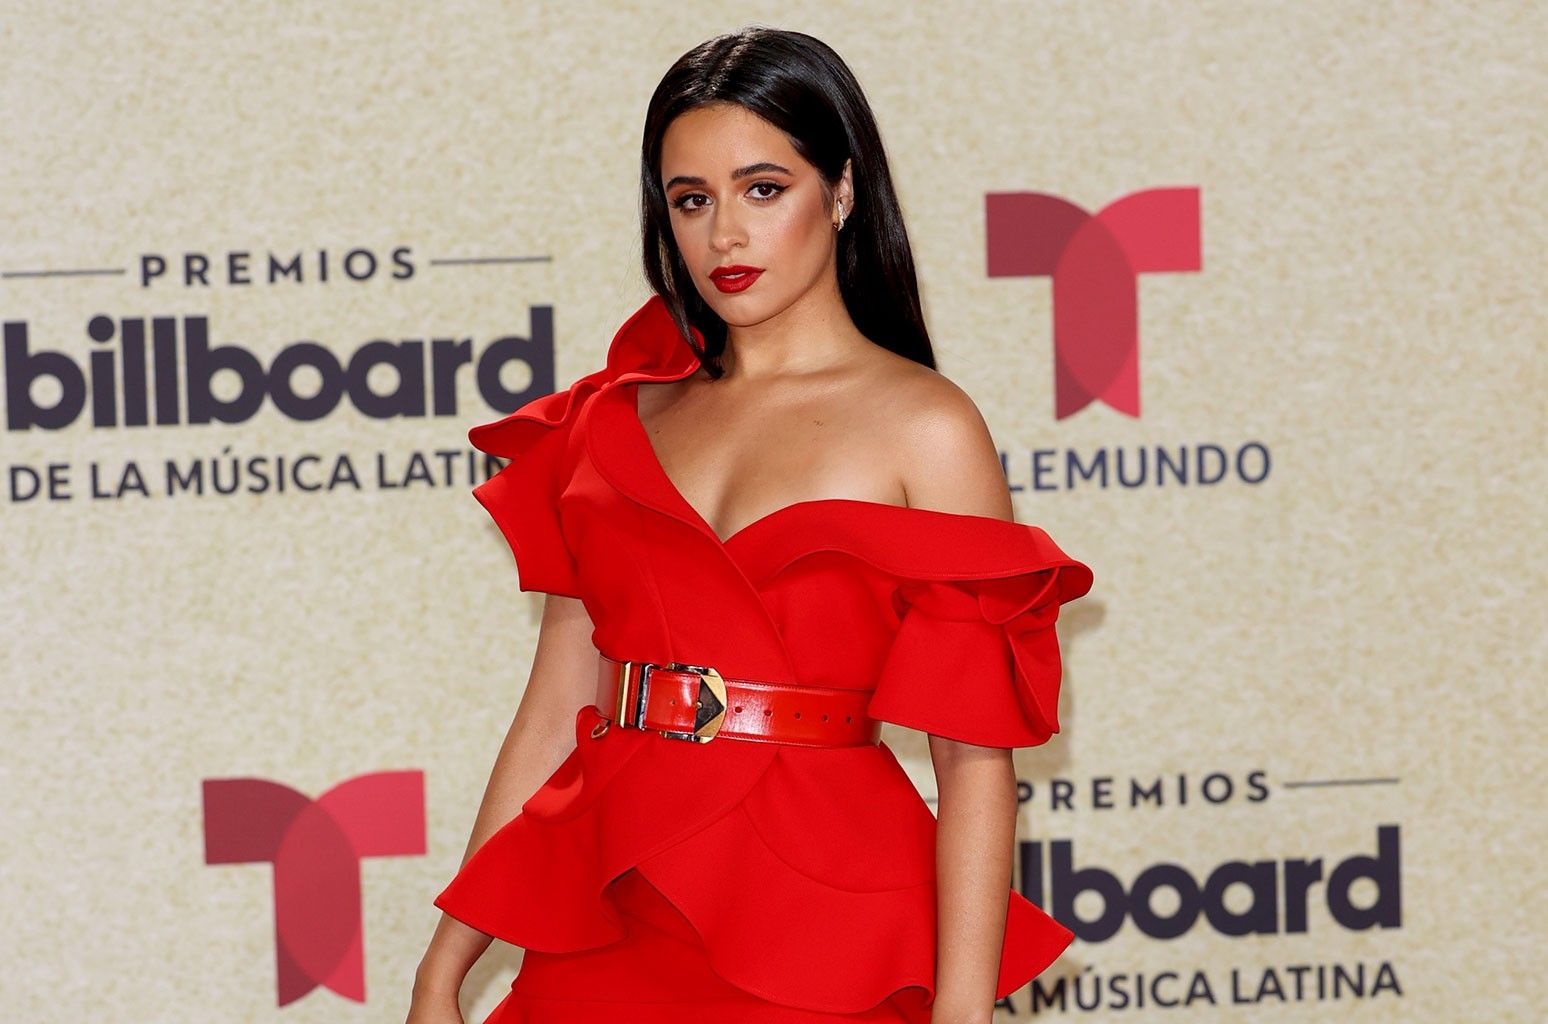 Camila Cabello Opens Latin Billboard Music Awards, Calls For End To